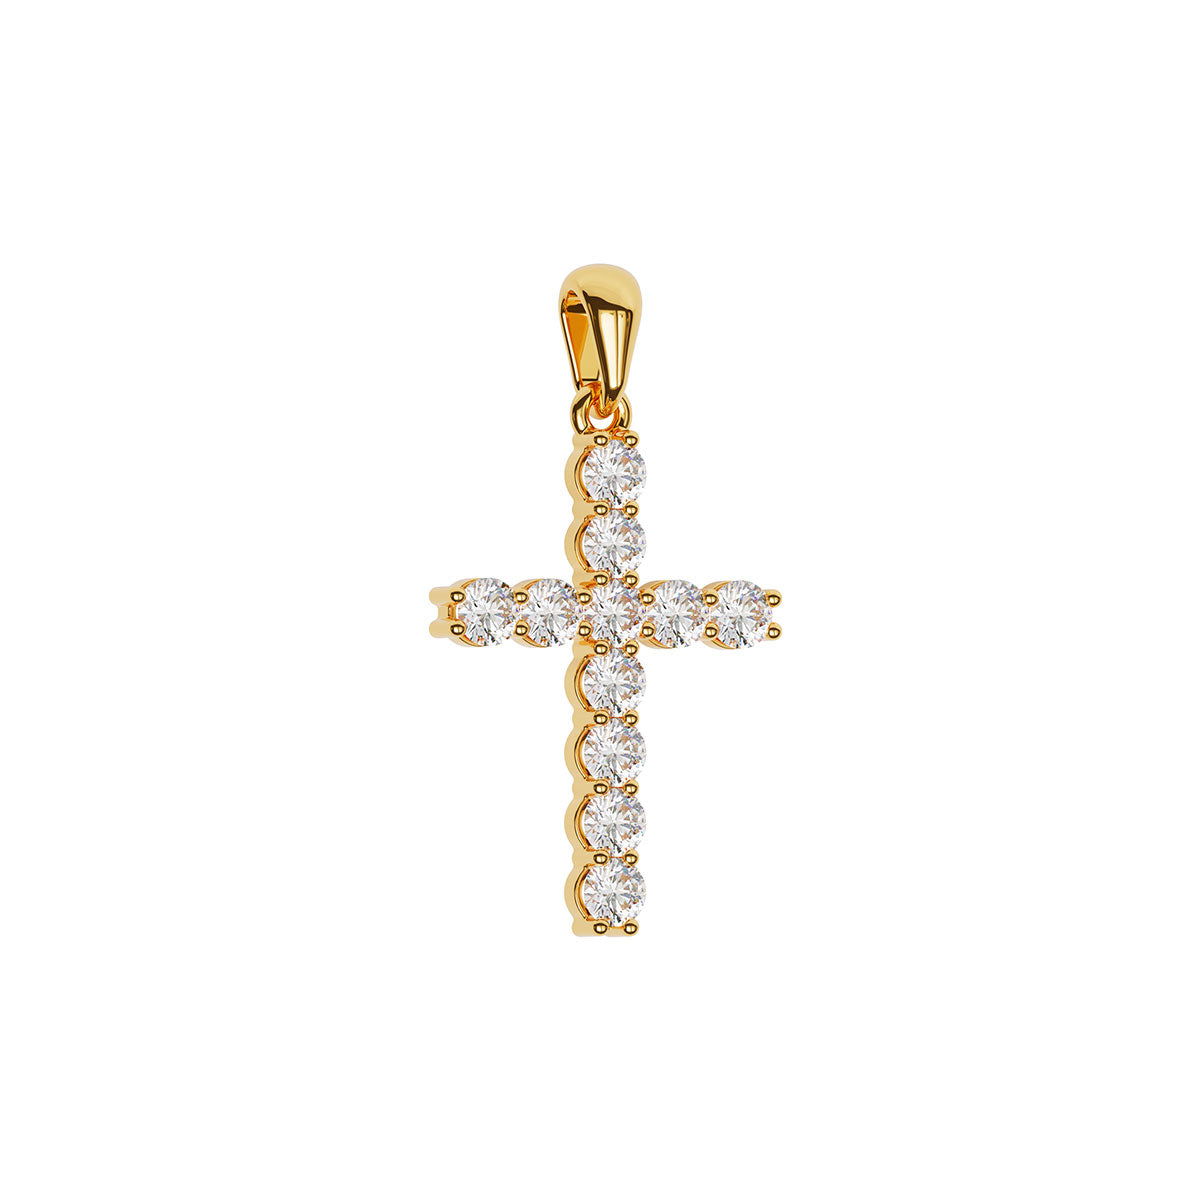 Standard Size Pavé Cross With 2.5mm Stones